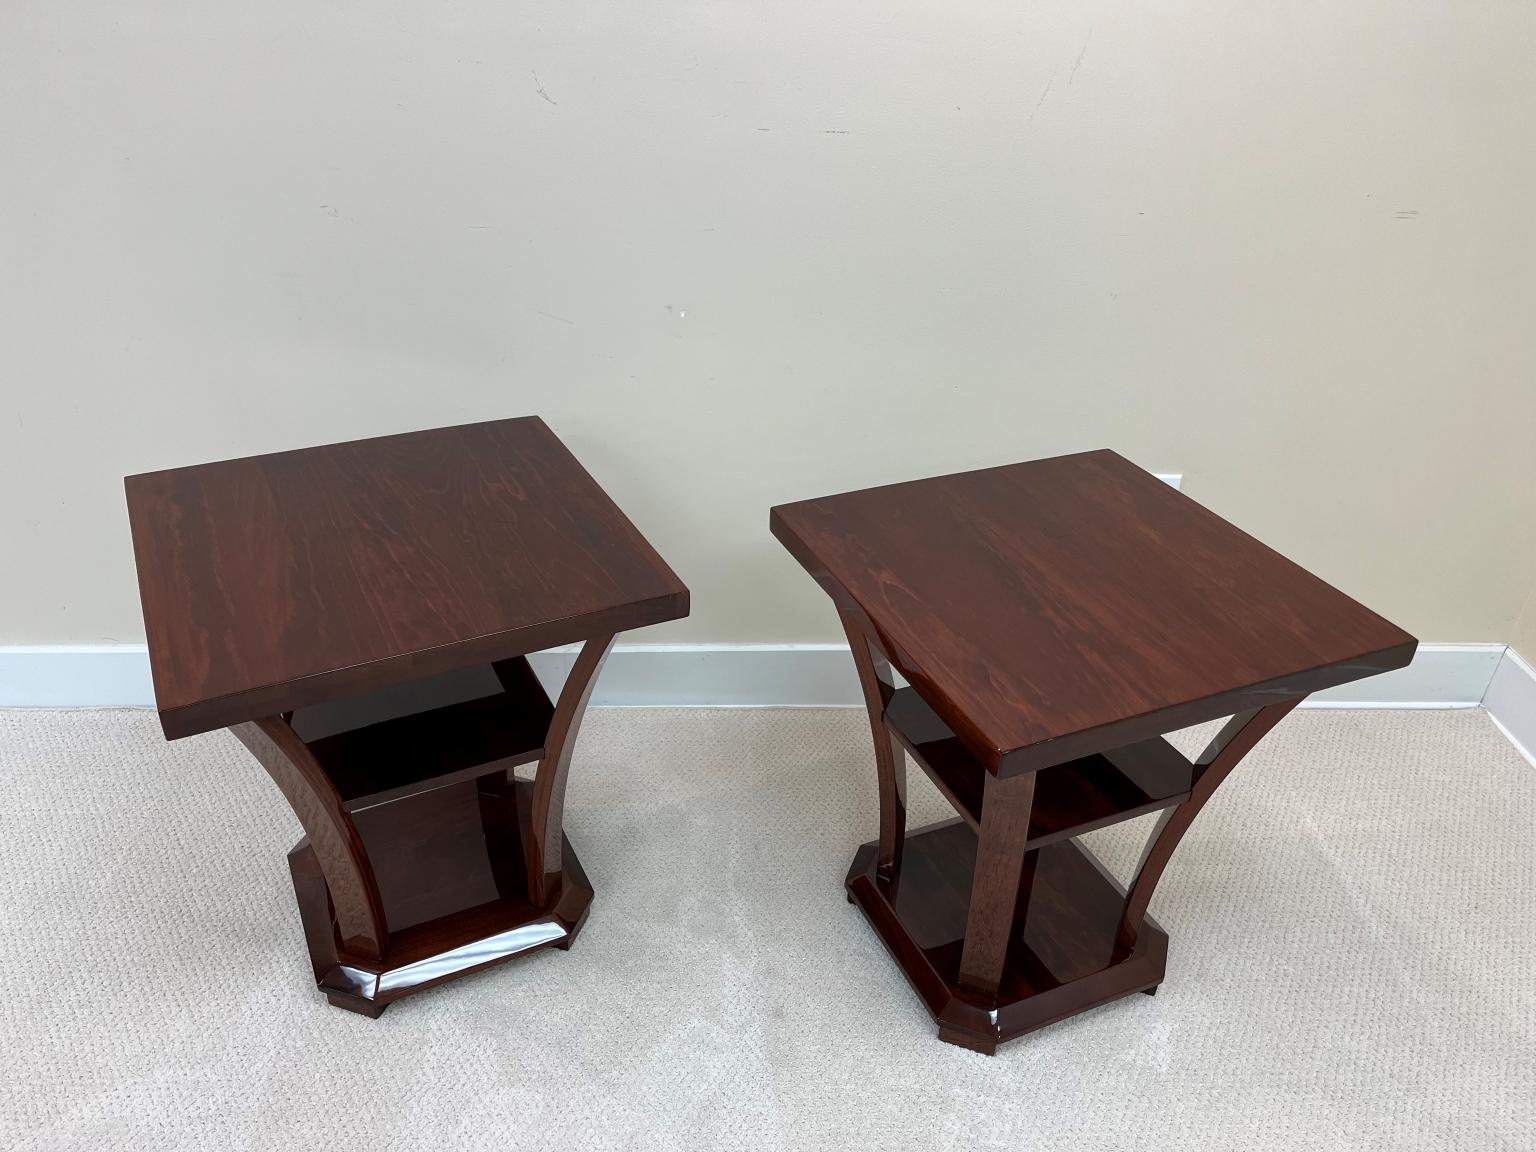 Pair Of Art Deco Modernist Square Top Three Tier Side Tables, American C. 1930's In Excellent Condition For Sale In Bernville, PA